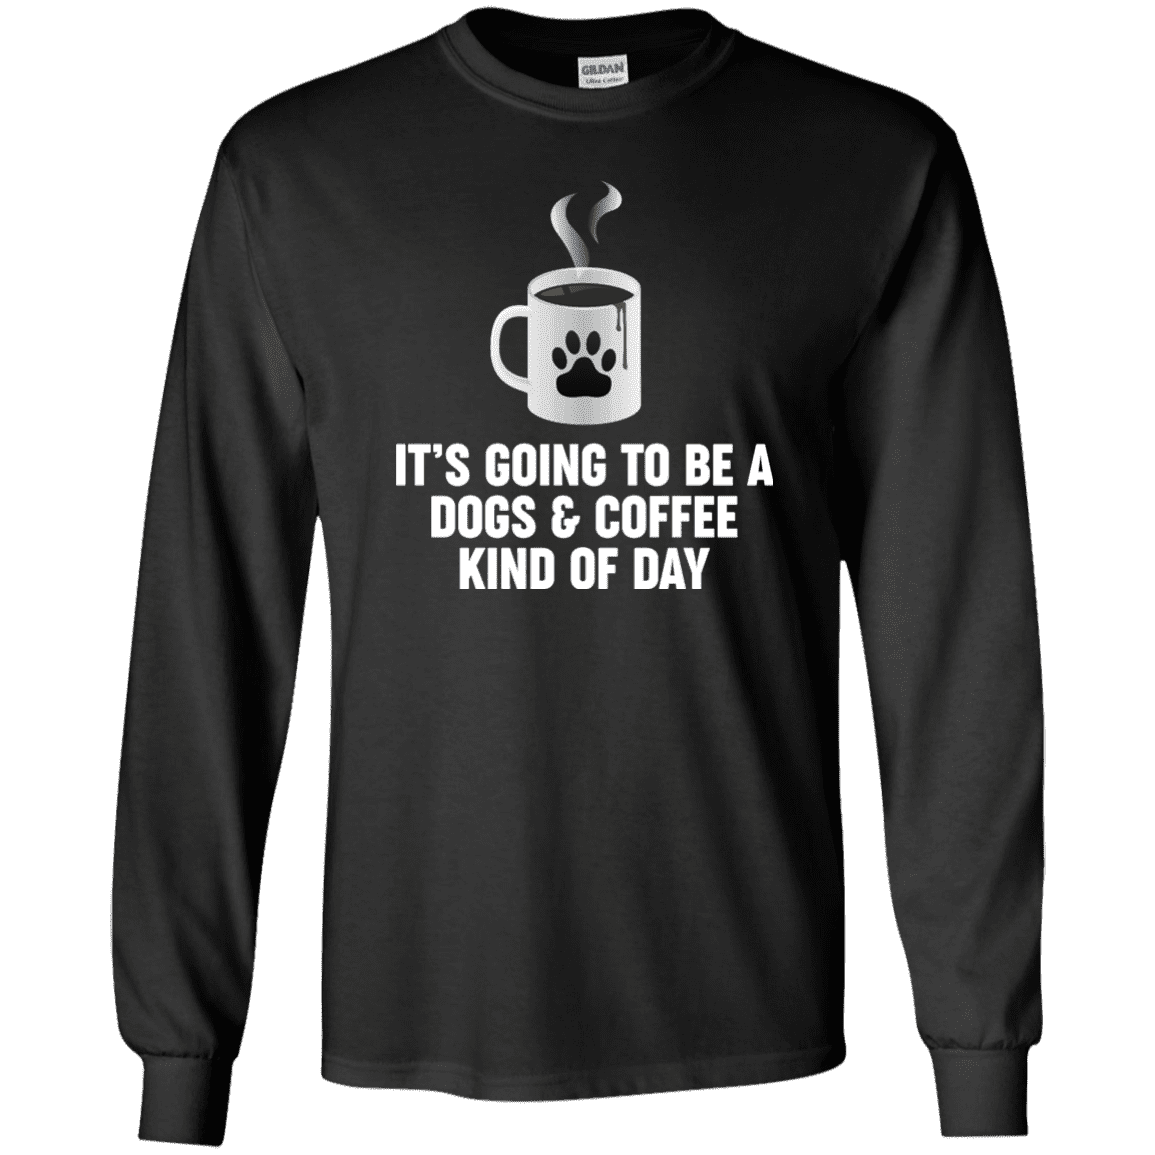 Dogs And Coffee - Long Sleeve T Shirt.